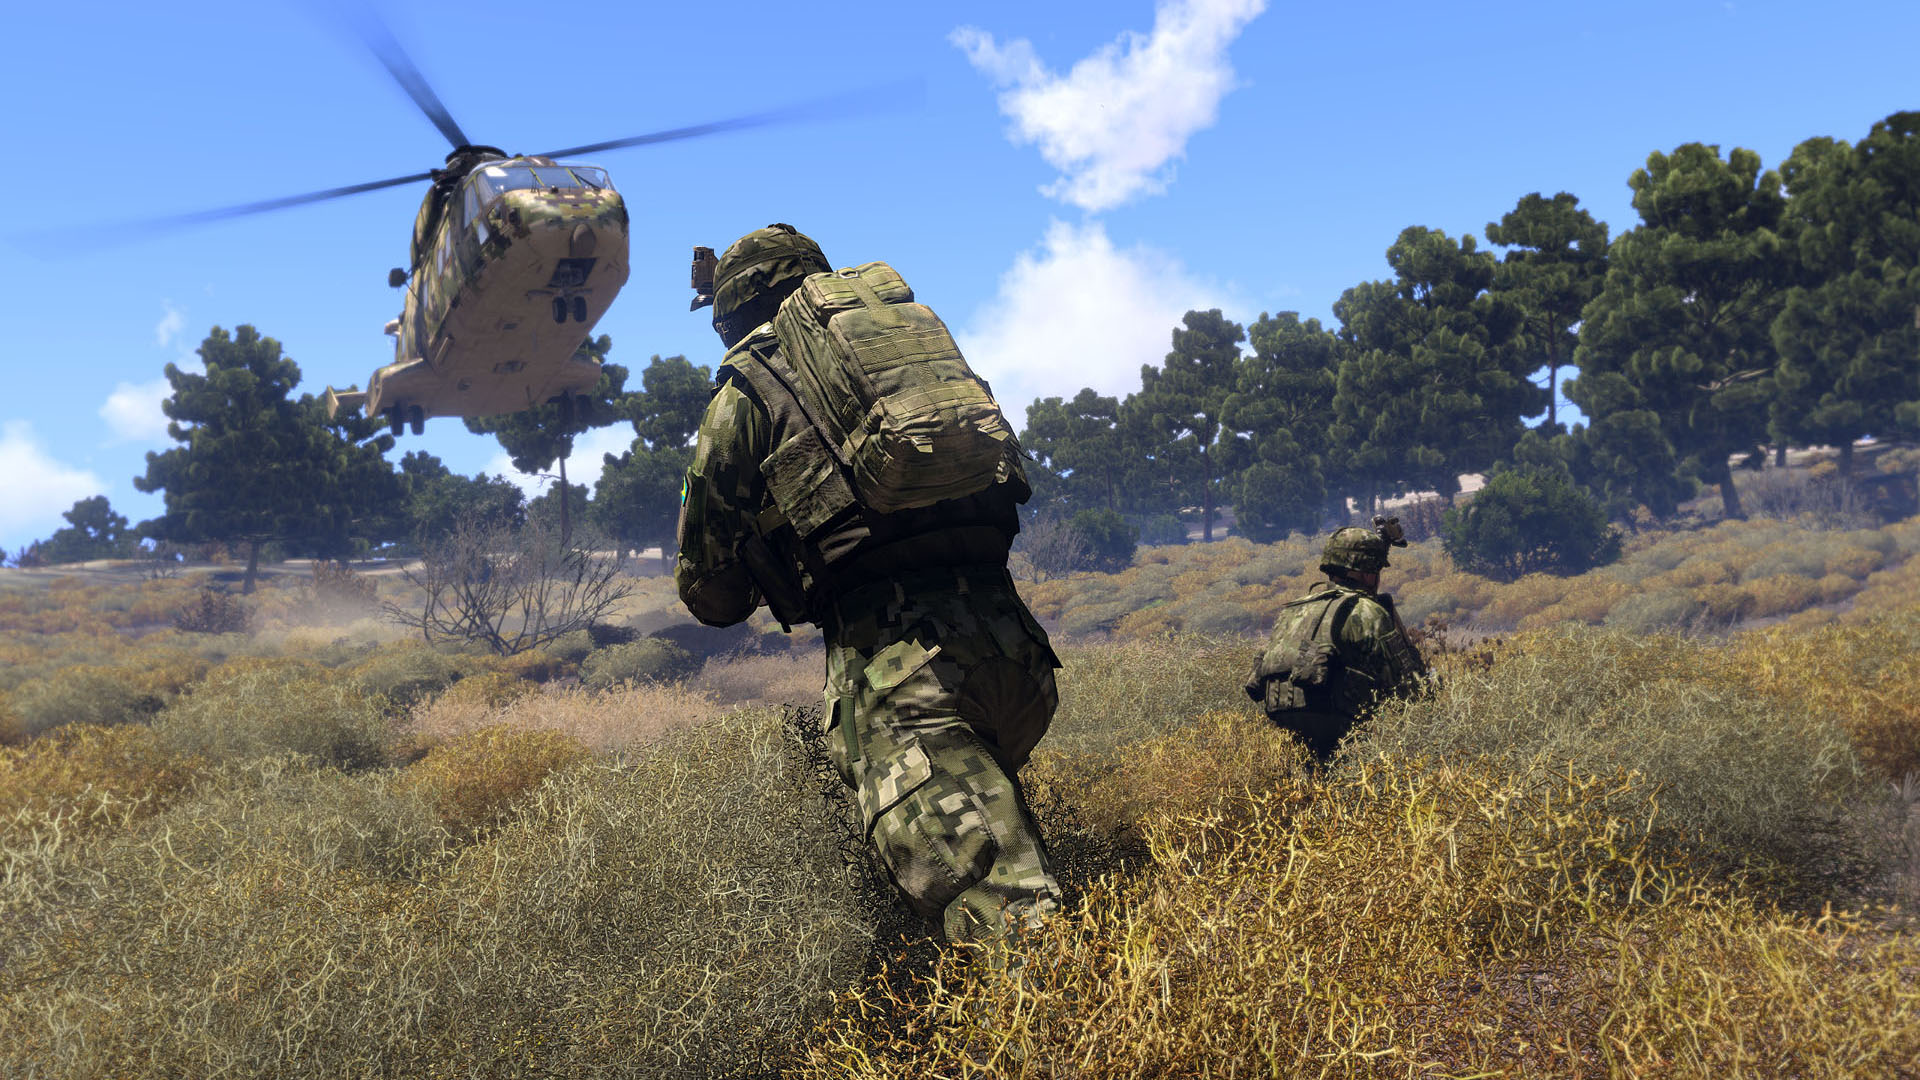 Screenshot from the game Arma 3